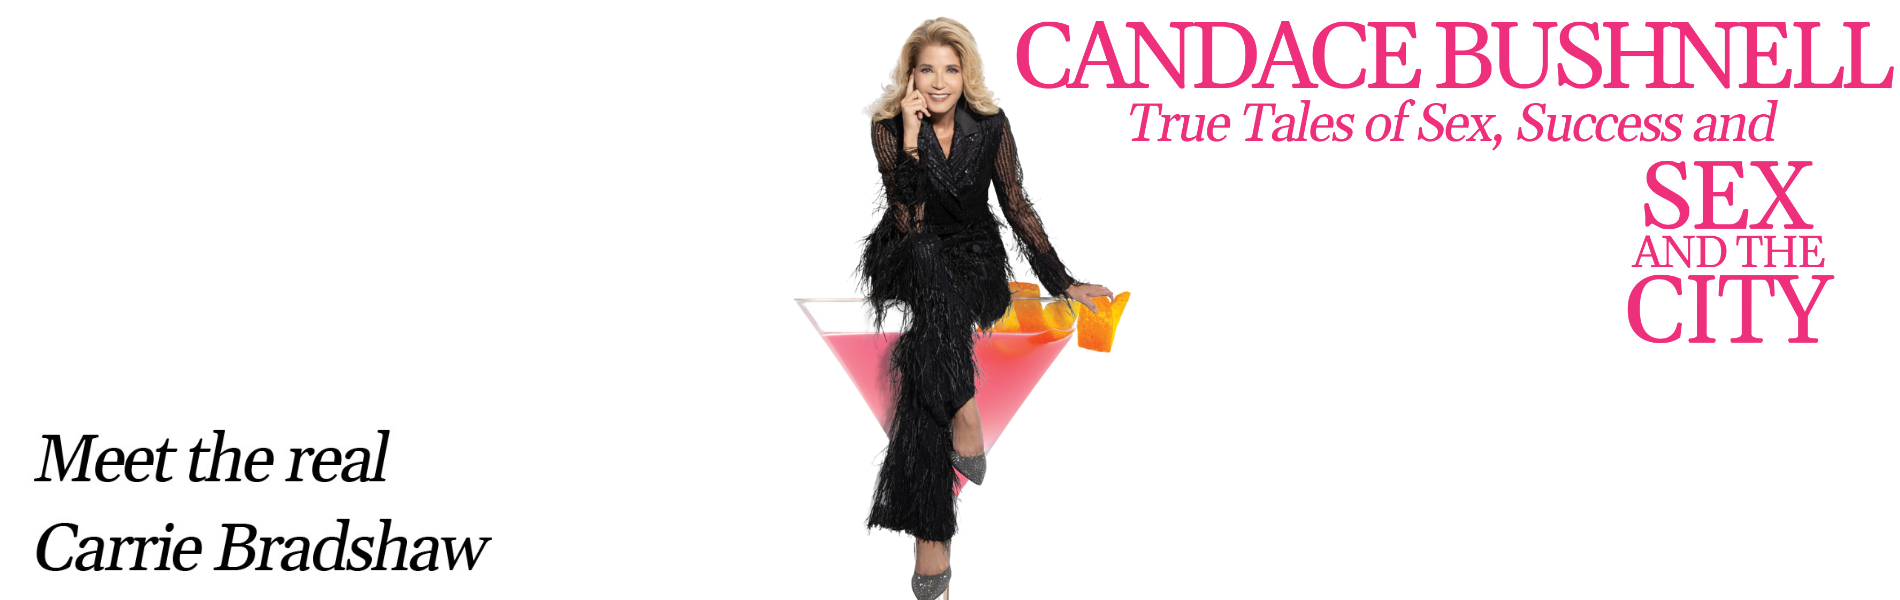 Meet the real Carrie Bradshaw. Candace Bushnell True Tales of Sex, Success and Sex and the City. Image of Candace Bushnell sitting on a martini glass, text 